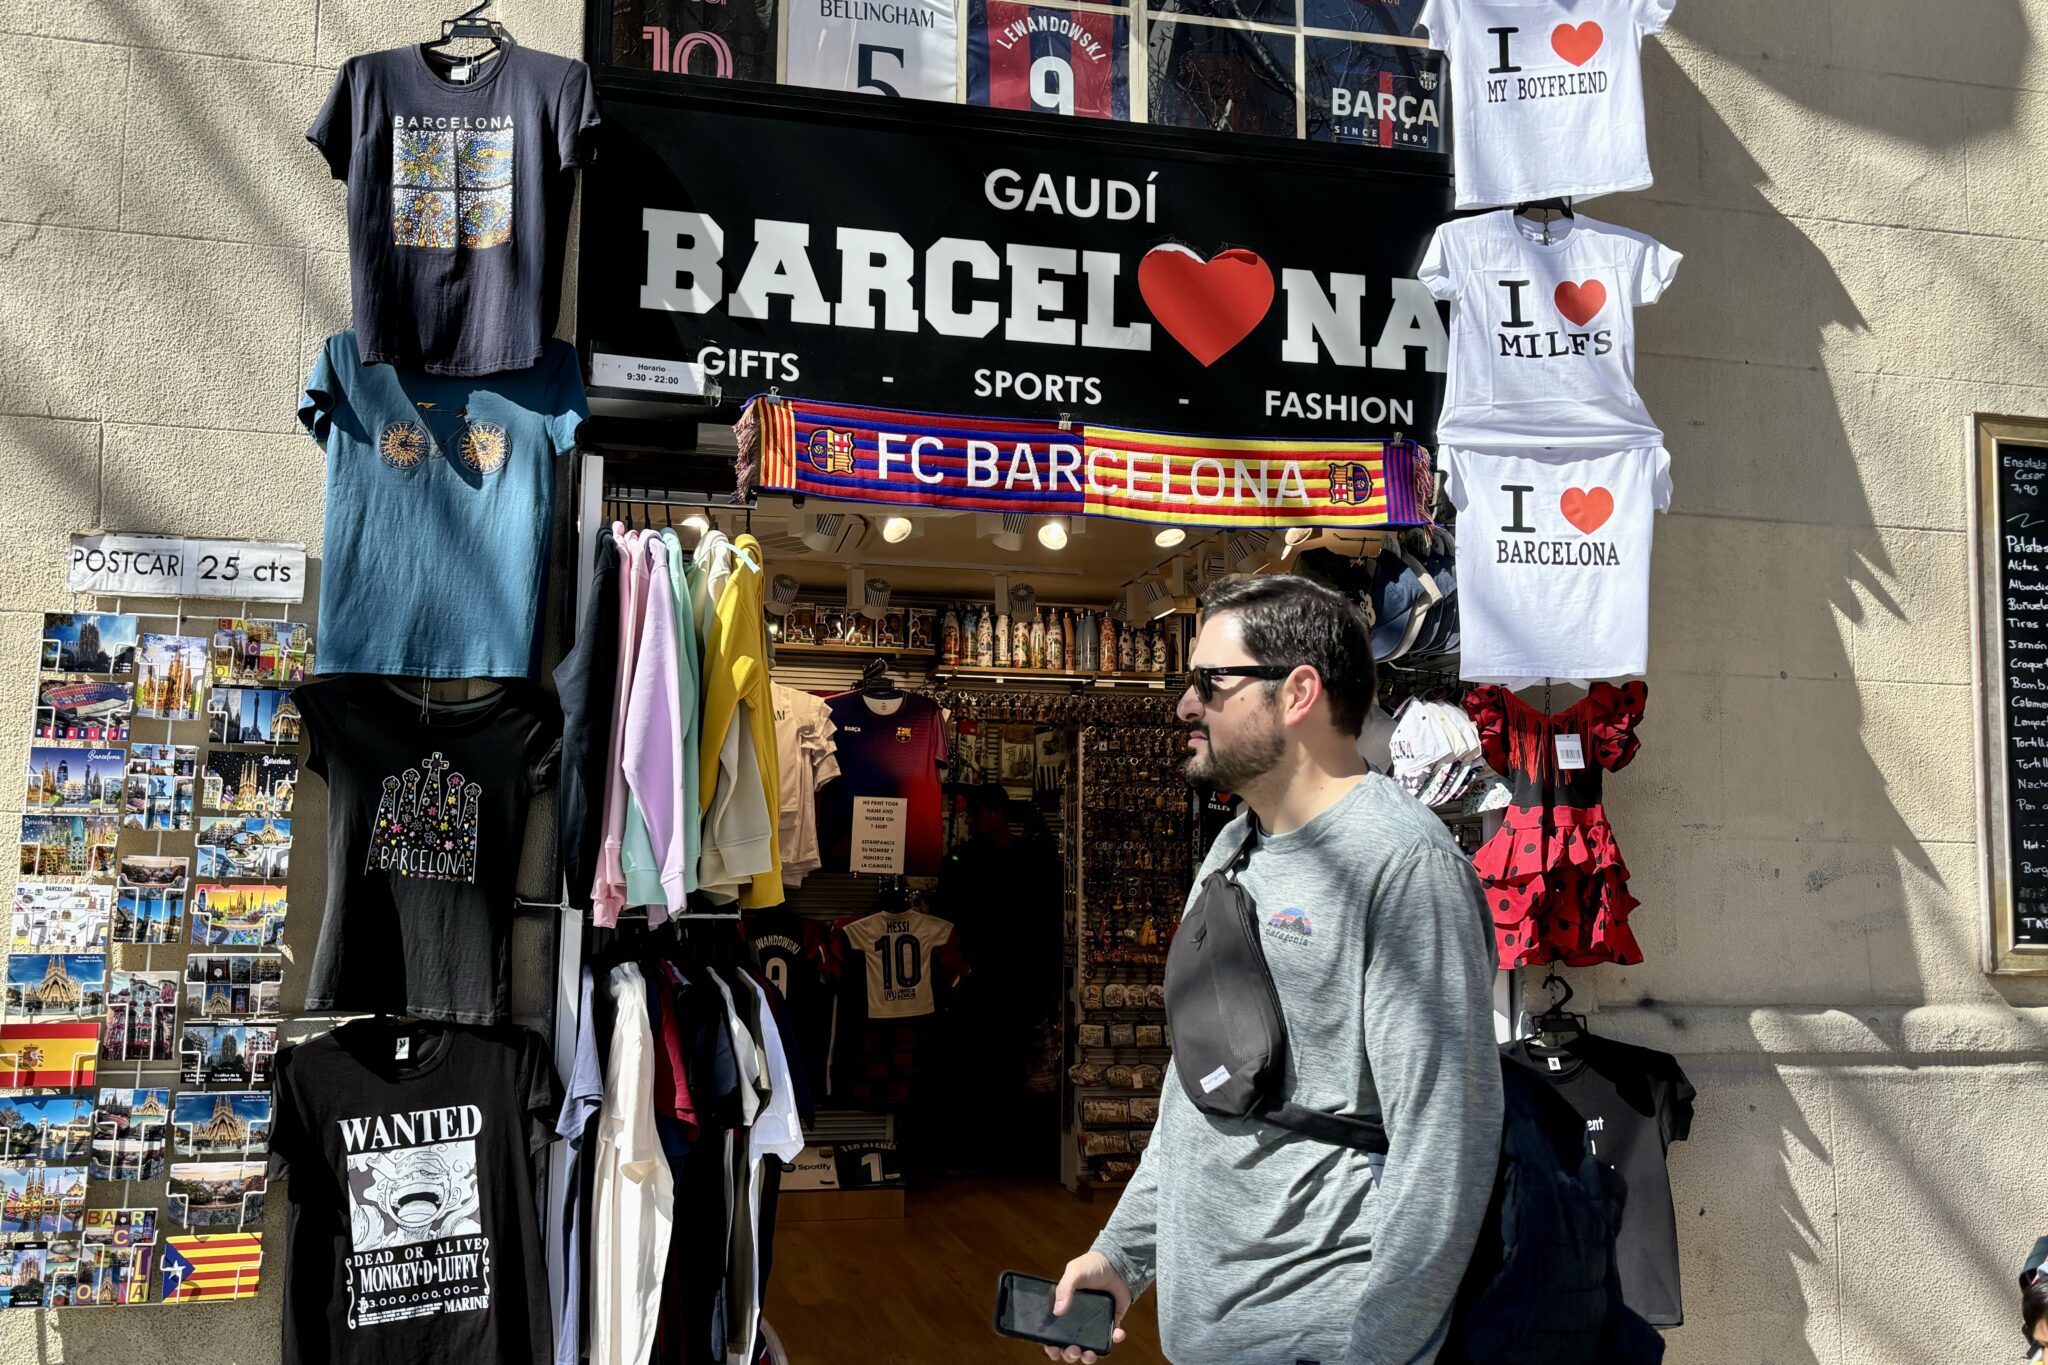 Tourist shops like the one in Barcelona, Spain were popular with many of the 71 million overseas visitors to Spain in 2022.